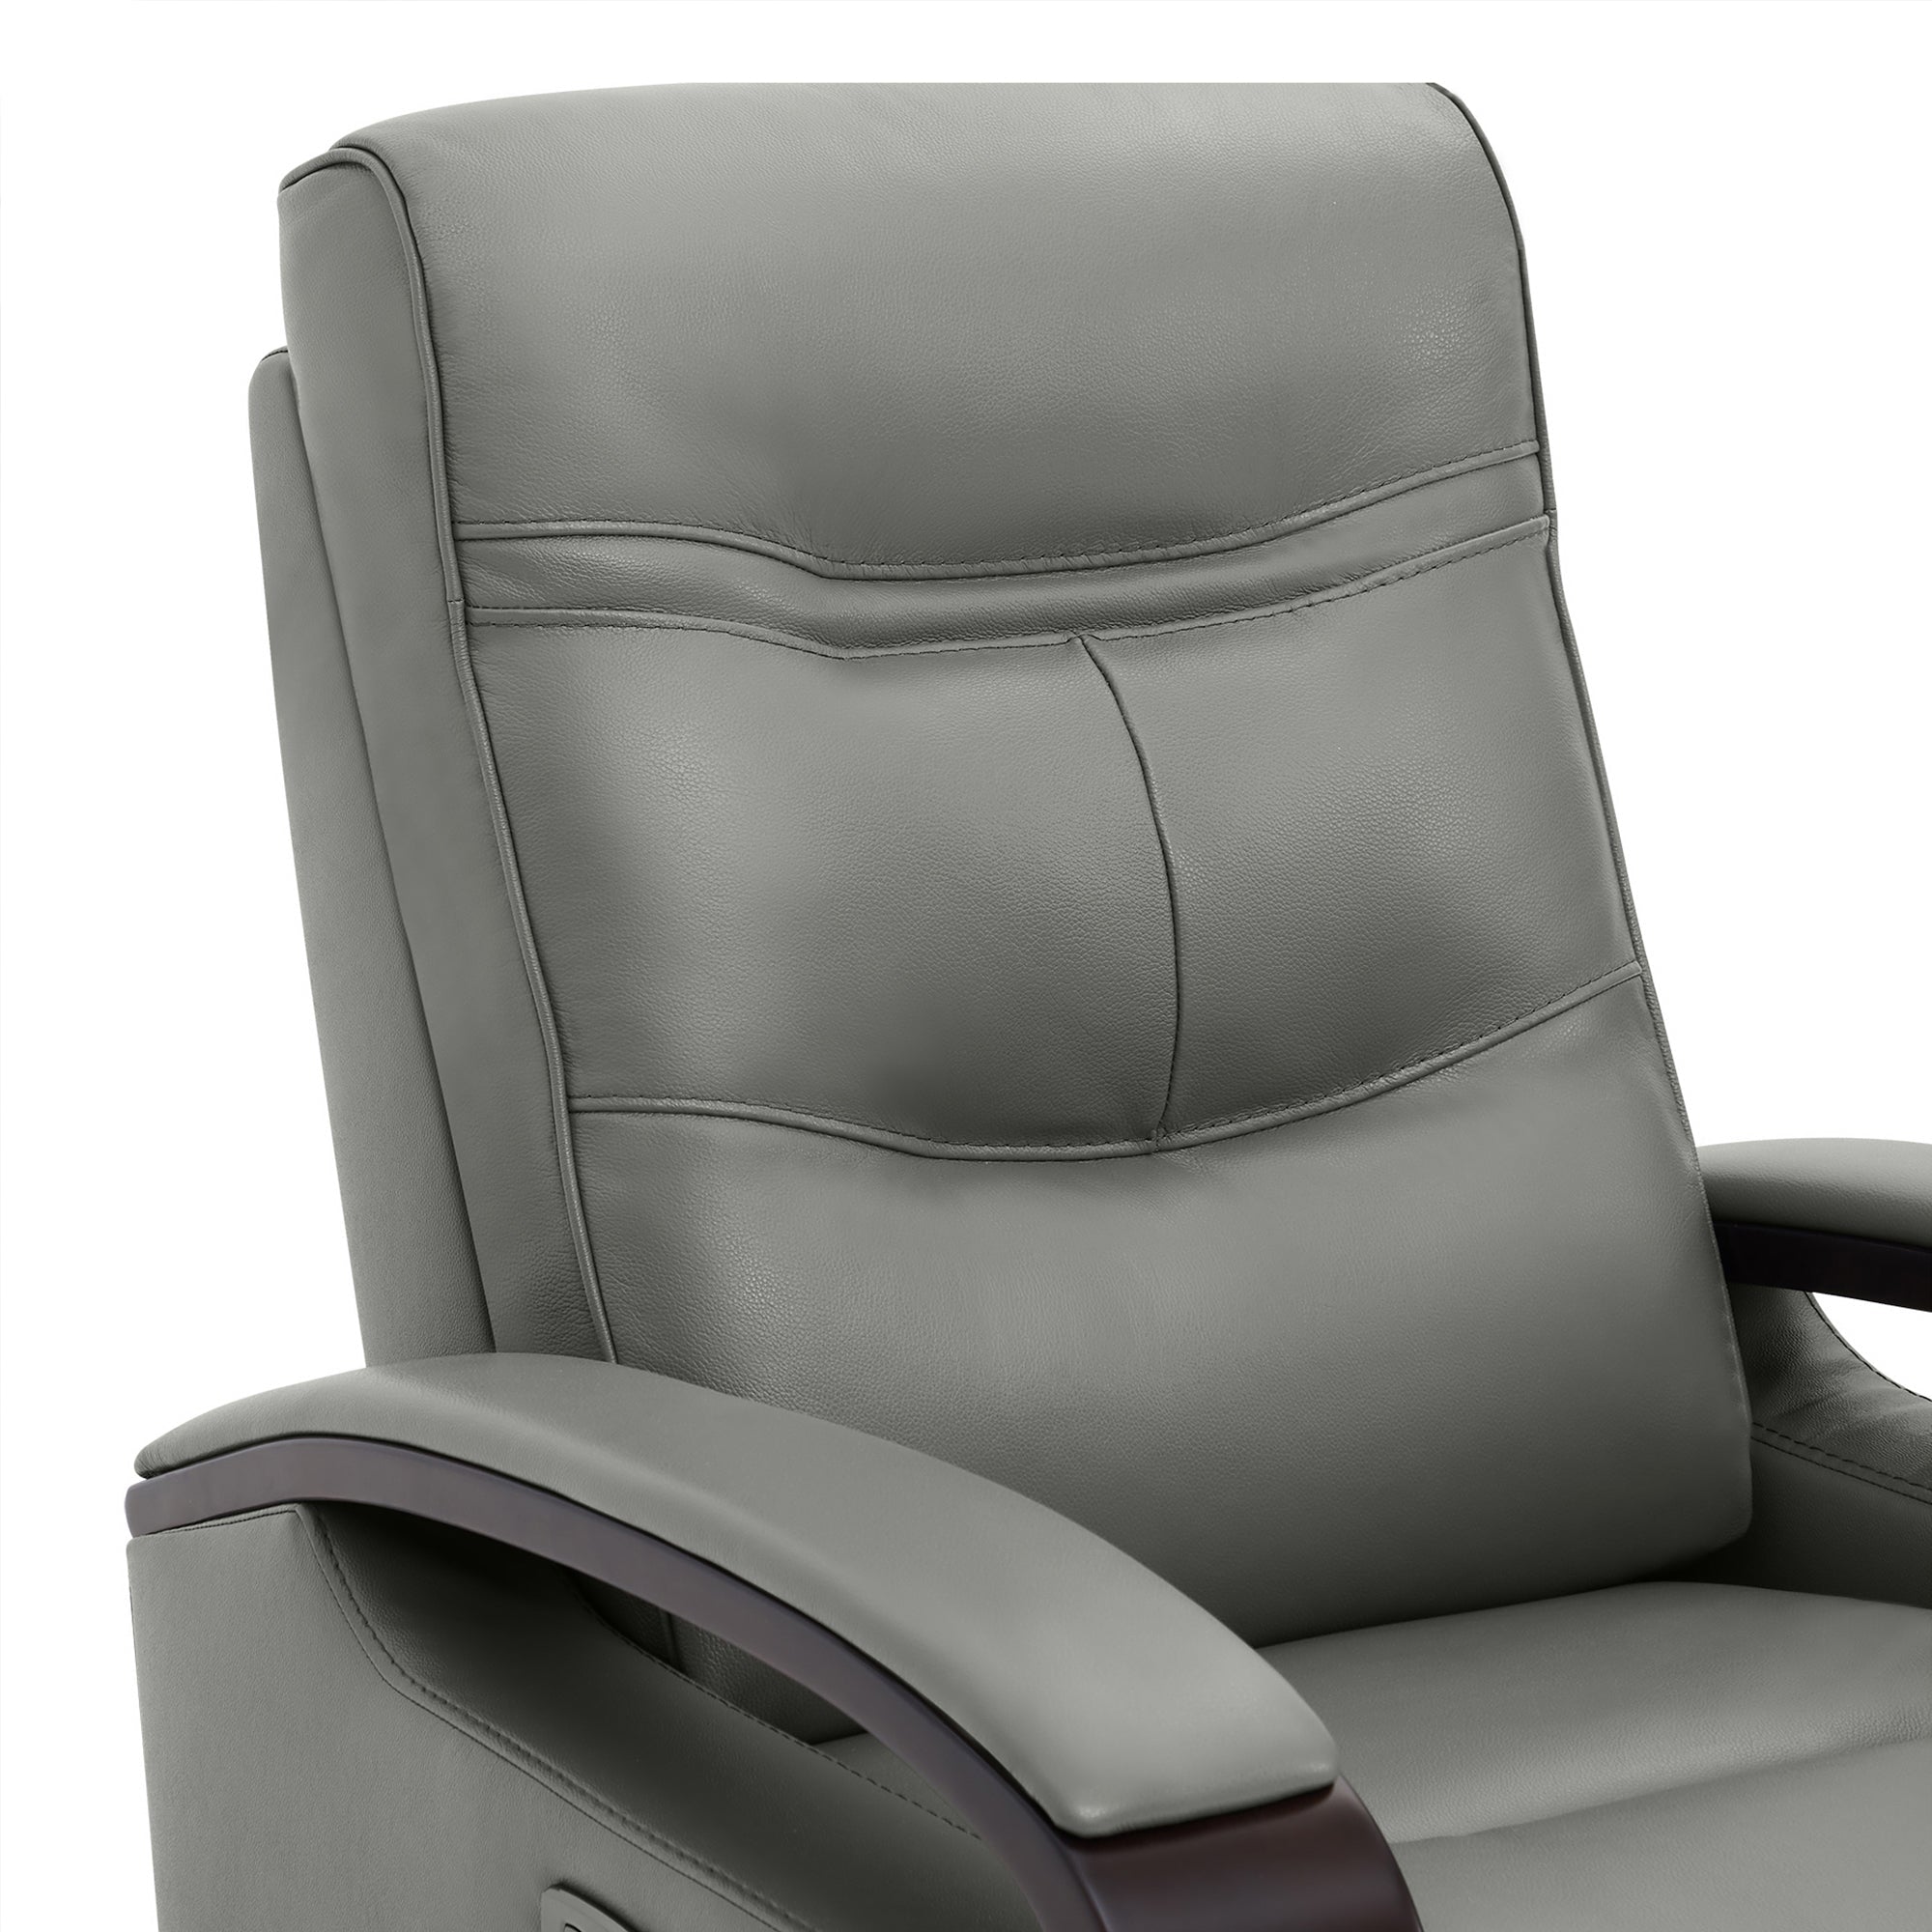 CHITA LIVING-Gentry Leather Power Swivel Glider Recliner with USB Charge-Recliners-Genuine Leather-Haze-